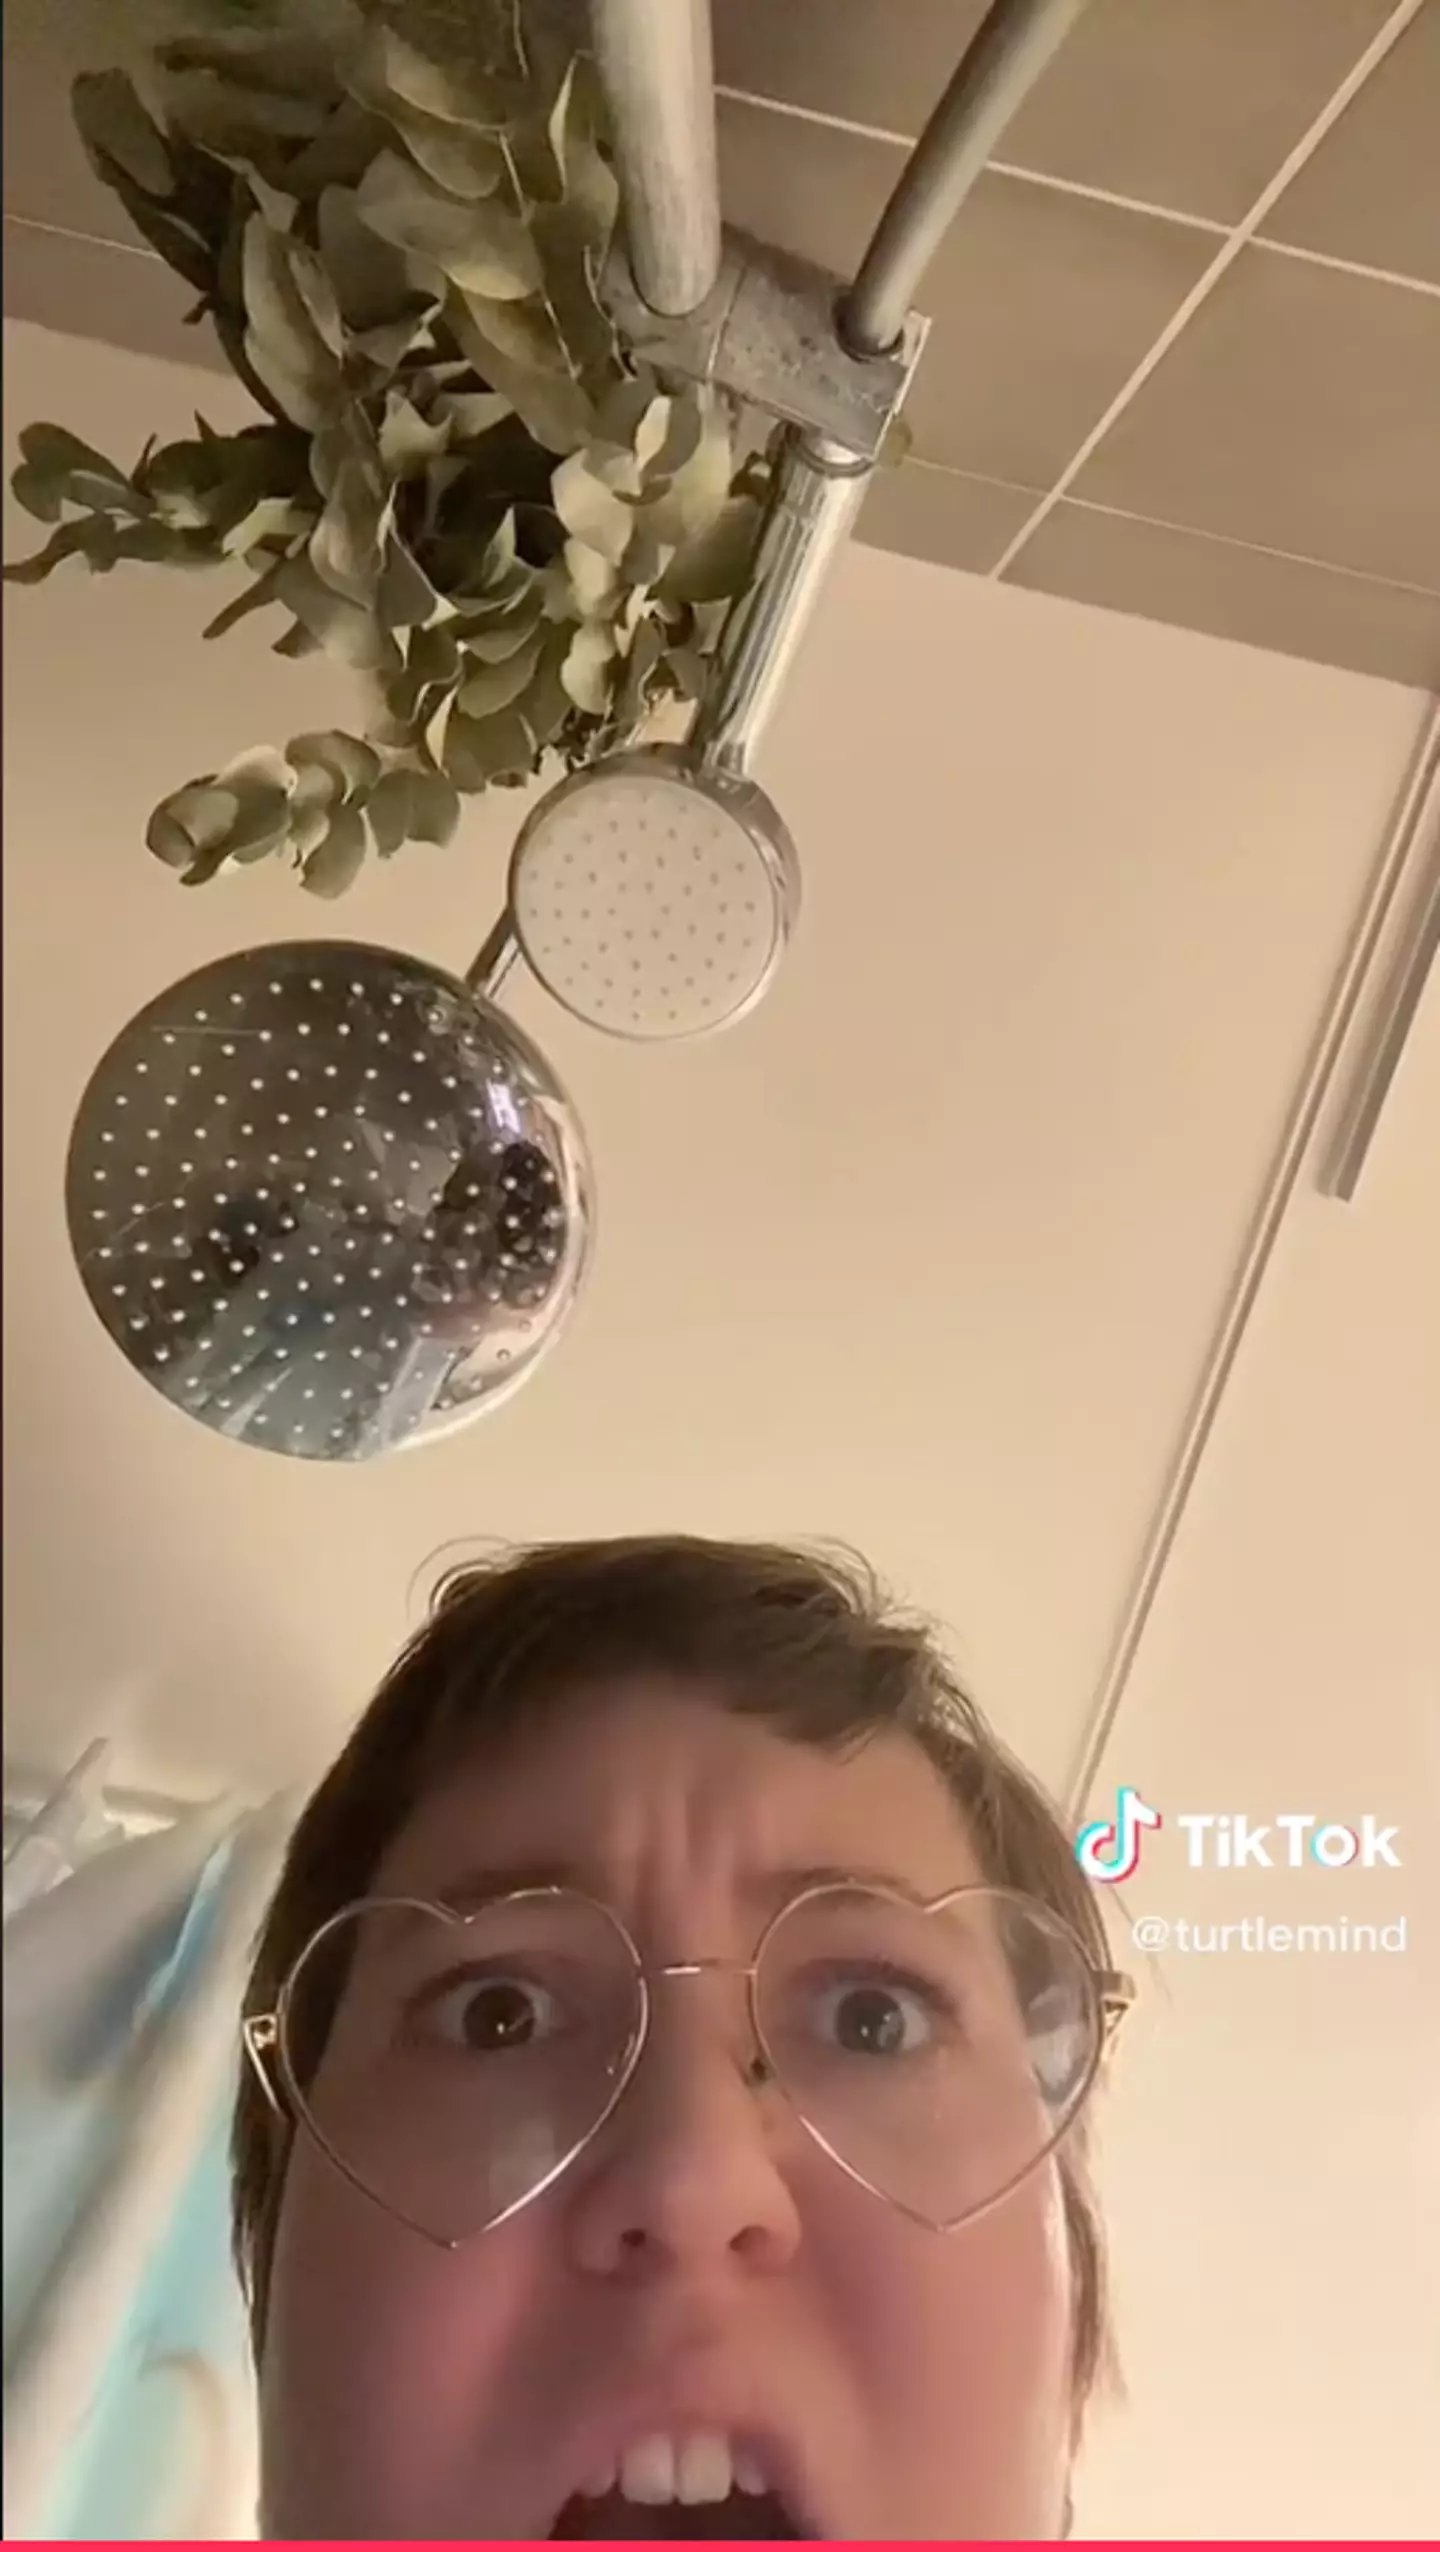 TikTok user, @turtlemind clearly astonished after trying the limescale cleaning hack for herself.